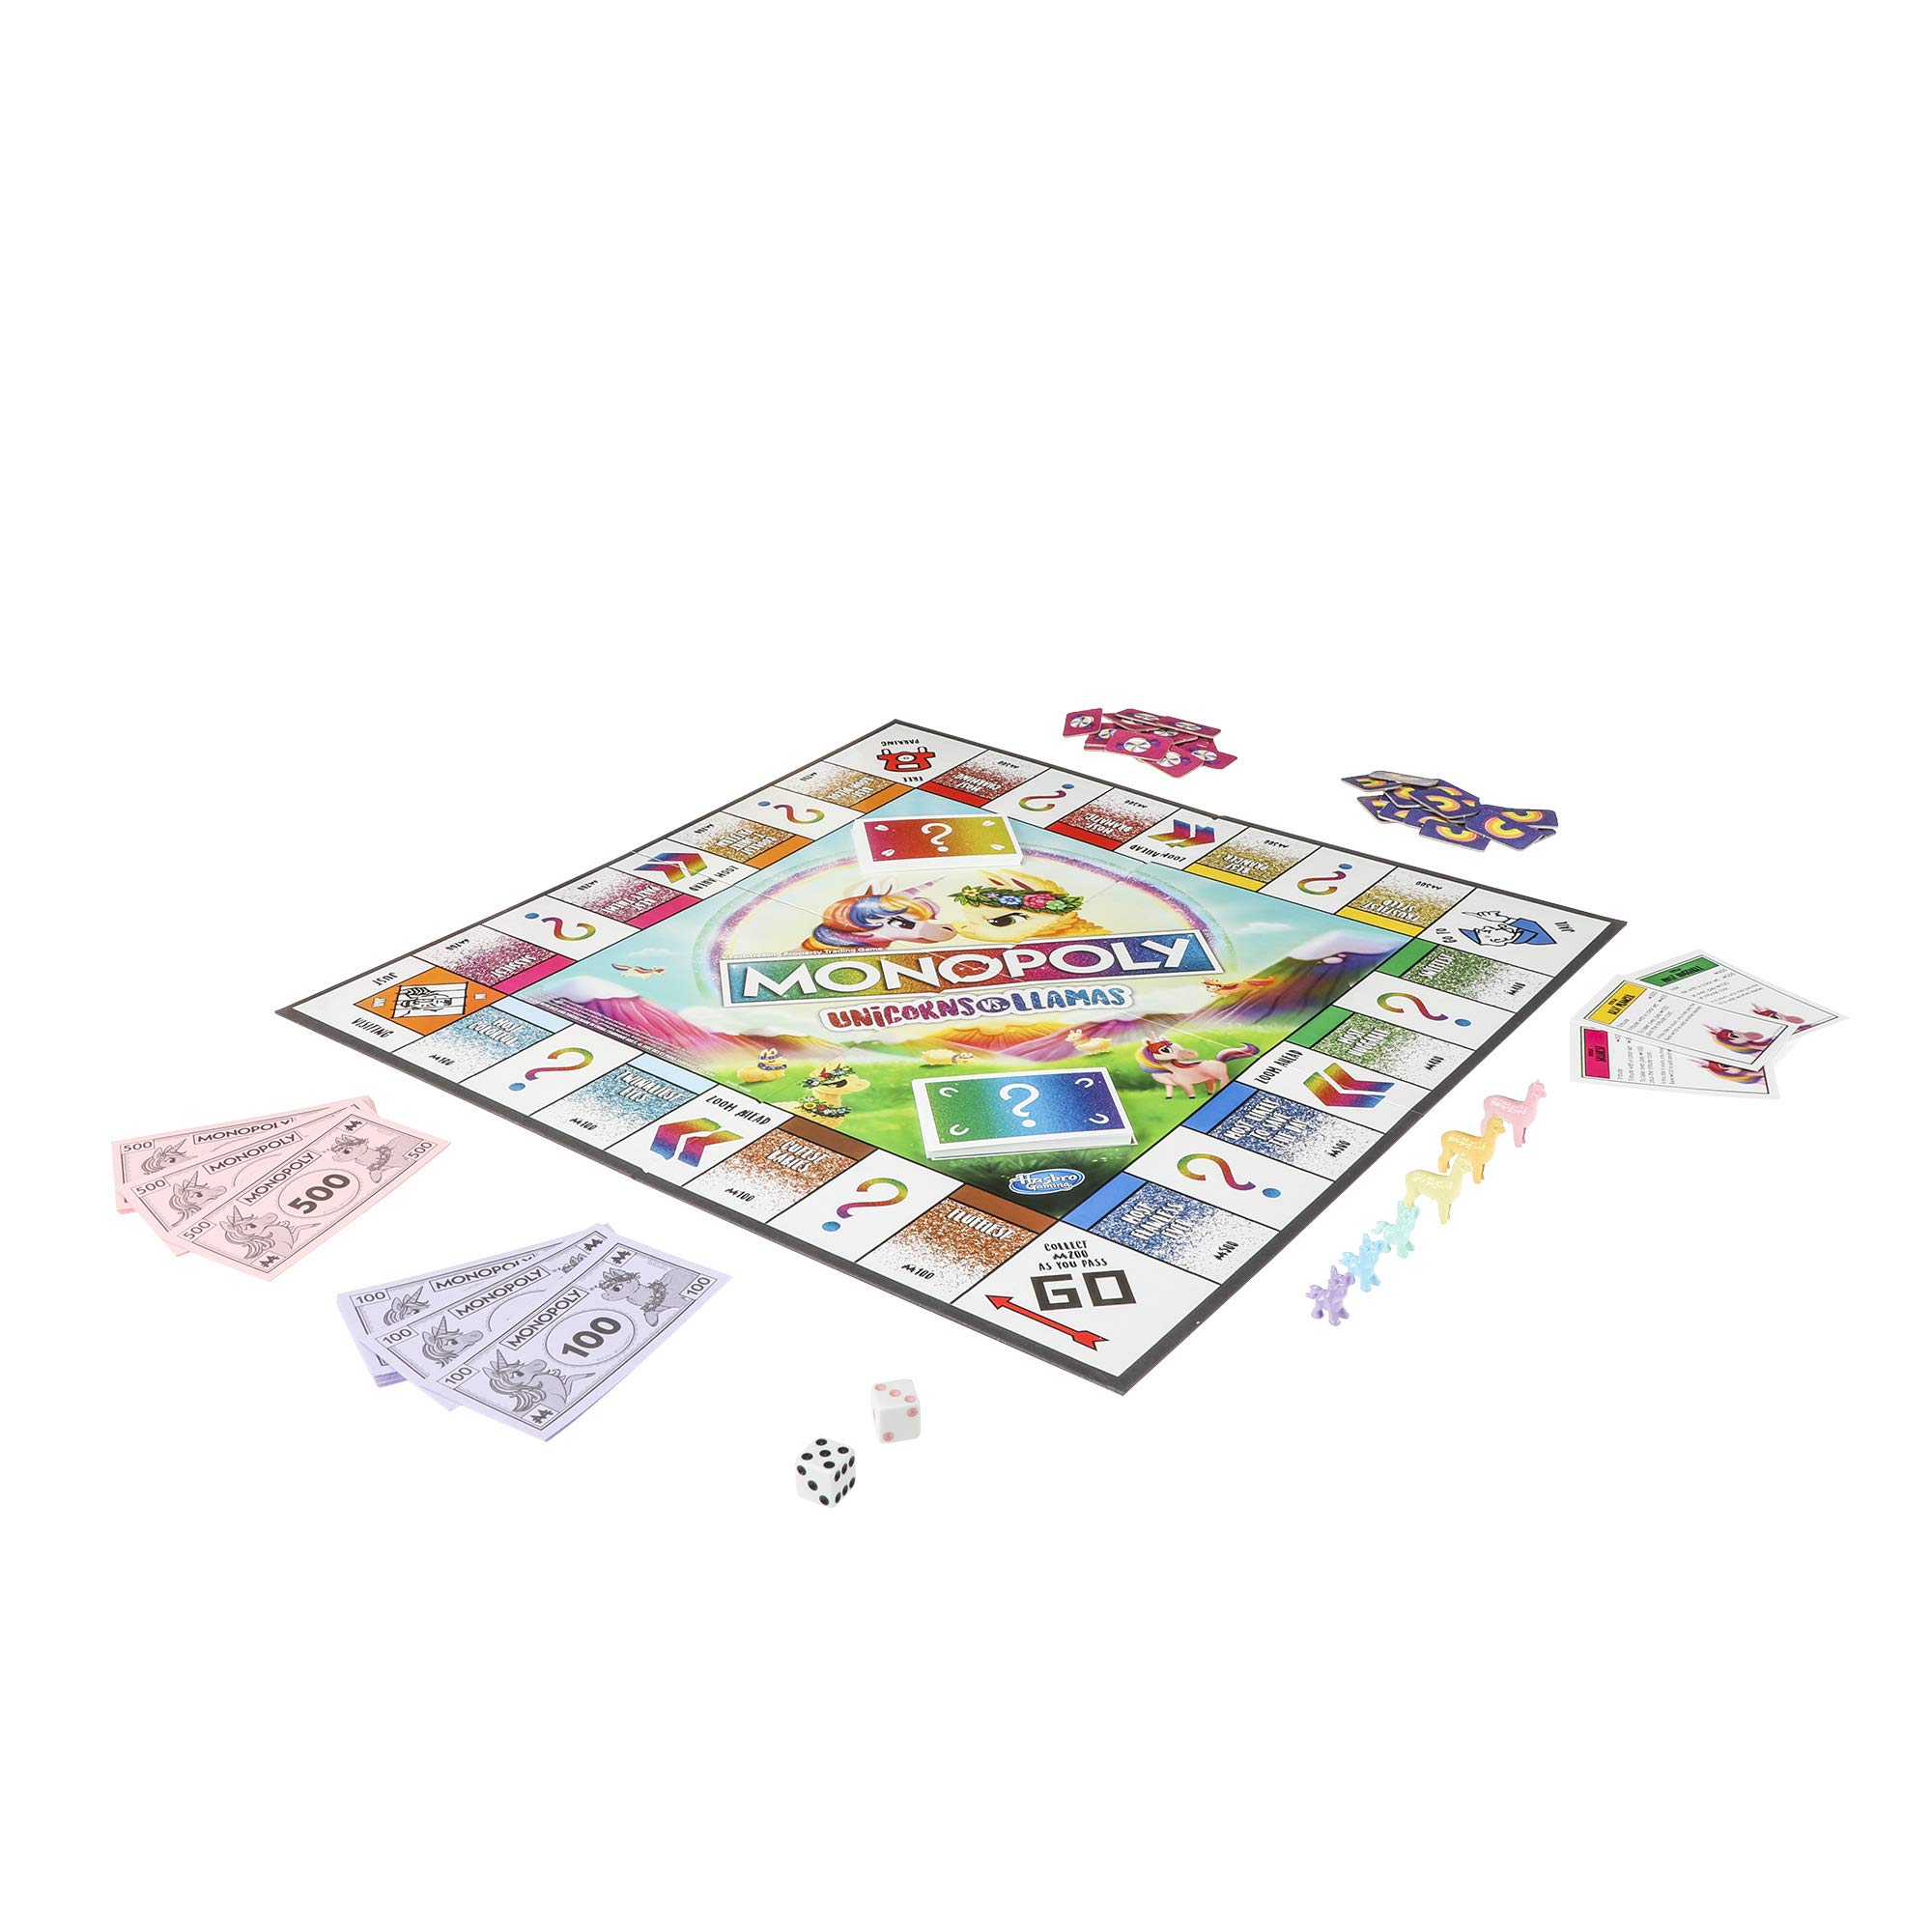 Monopoly Unicorns vs. Llamas Board Game for Ages 8 and Up; Play on Team Unicorn or Team Llama (Amazon Exclusive)